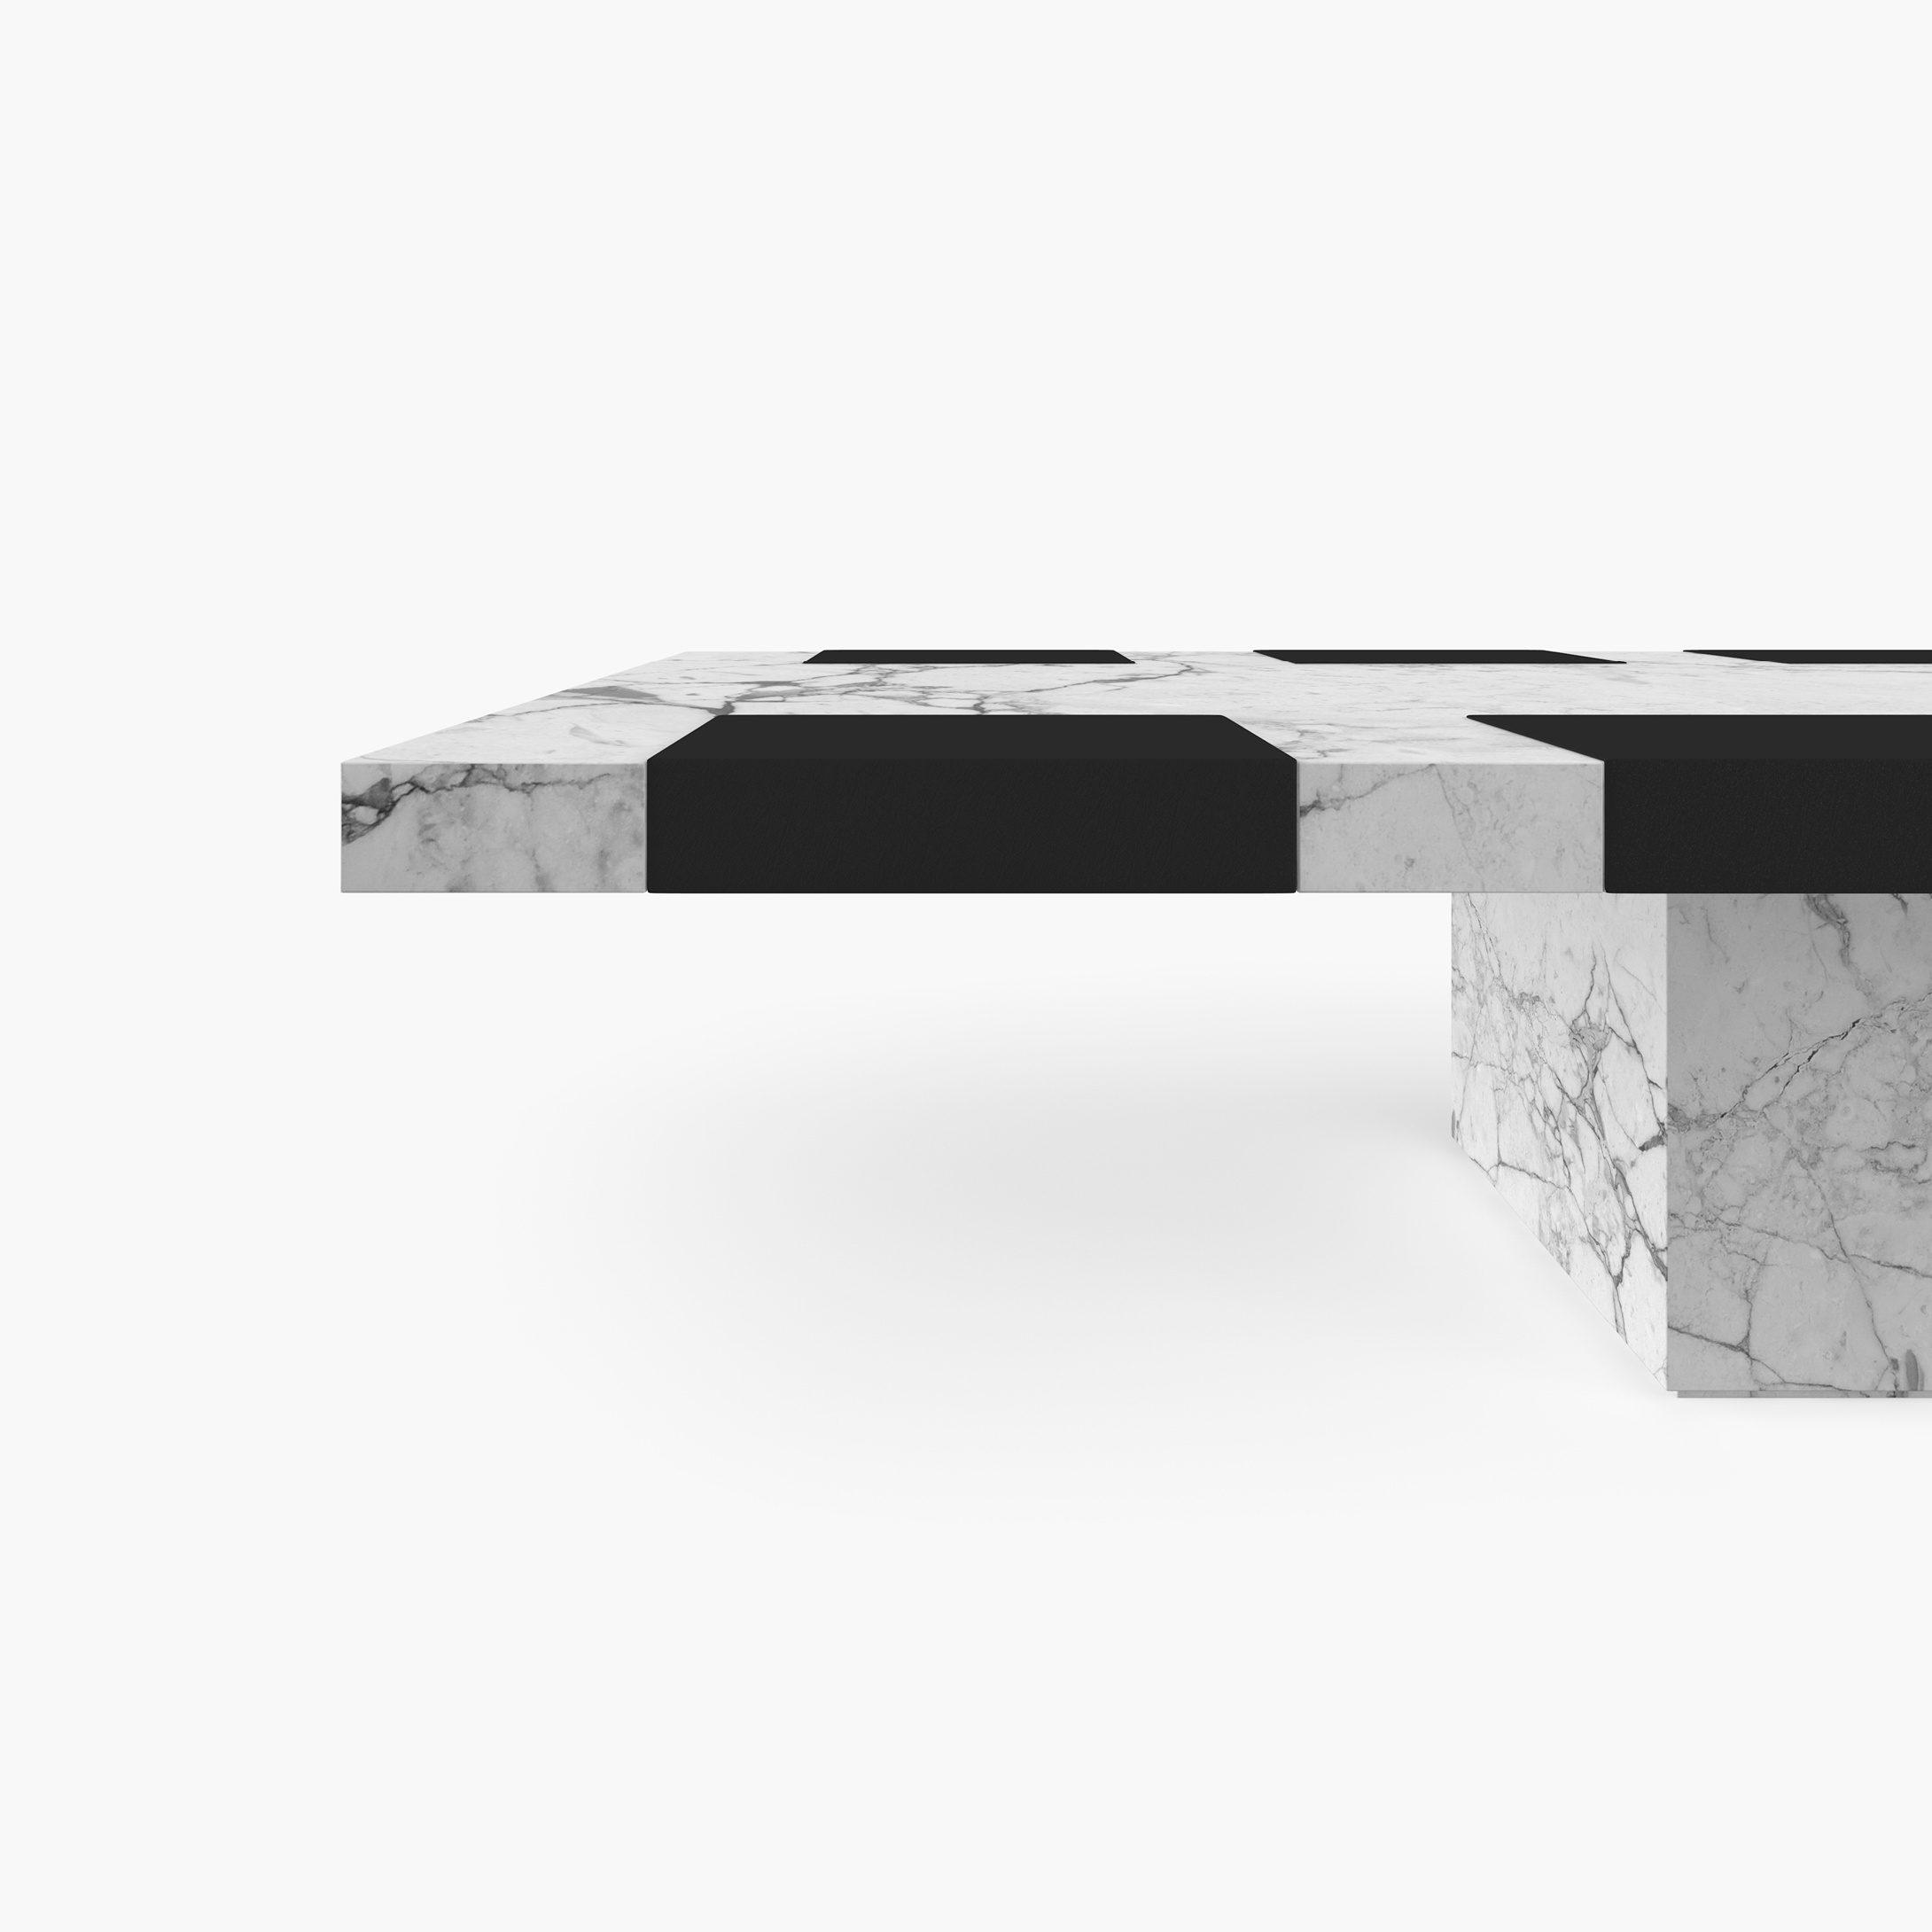 Conference Table very large with pull out writing pads White Arabescato Marble unfathomable simplicity Boardroom minimalism Conference ┬┤Tables FS 422 FELIX SCHWAKE